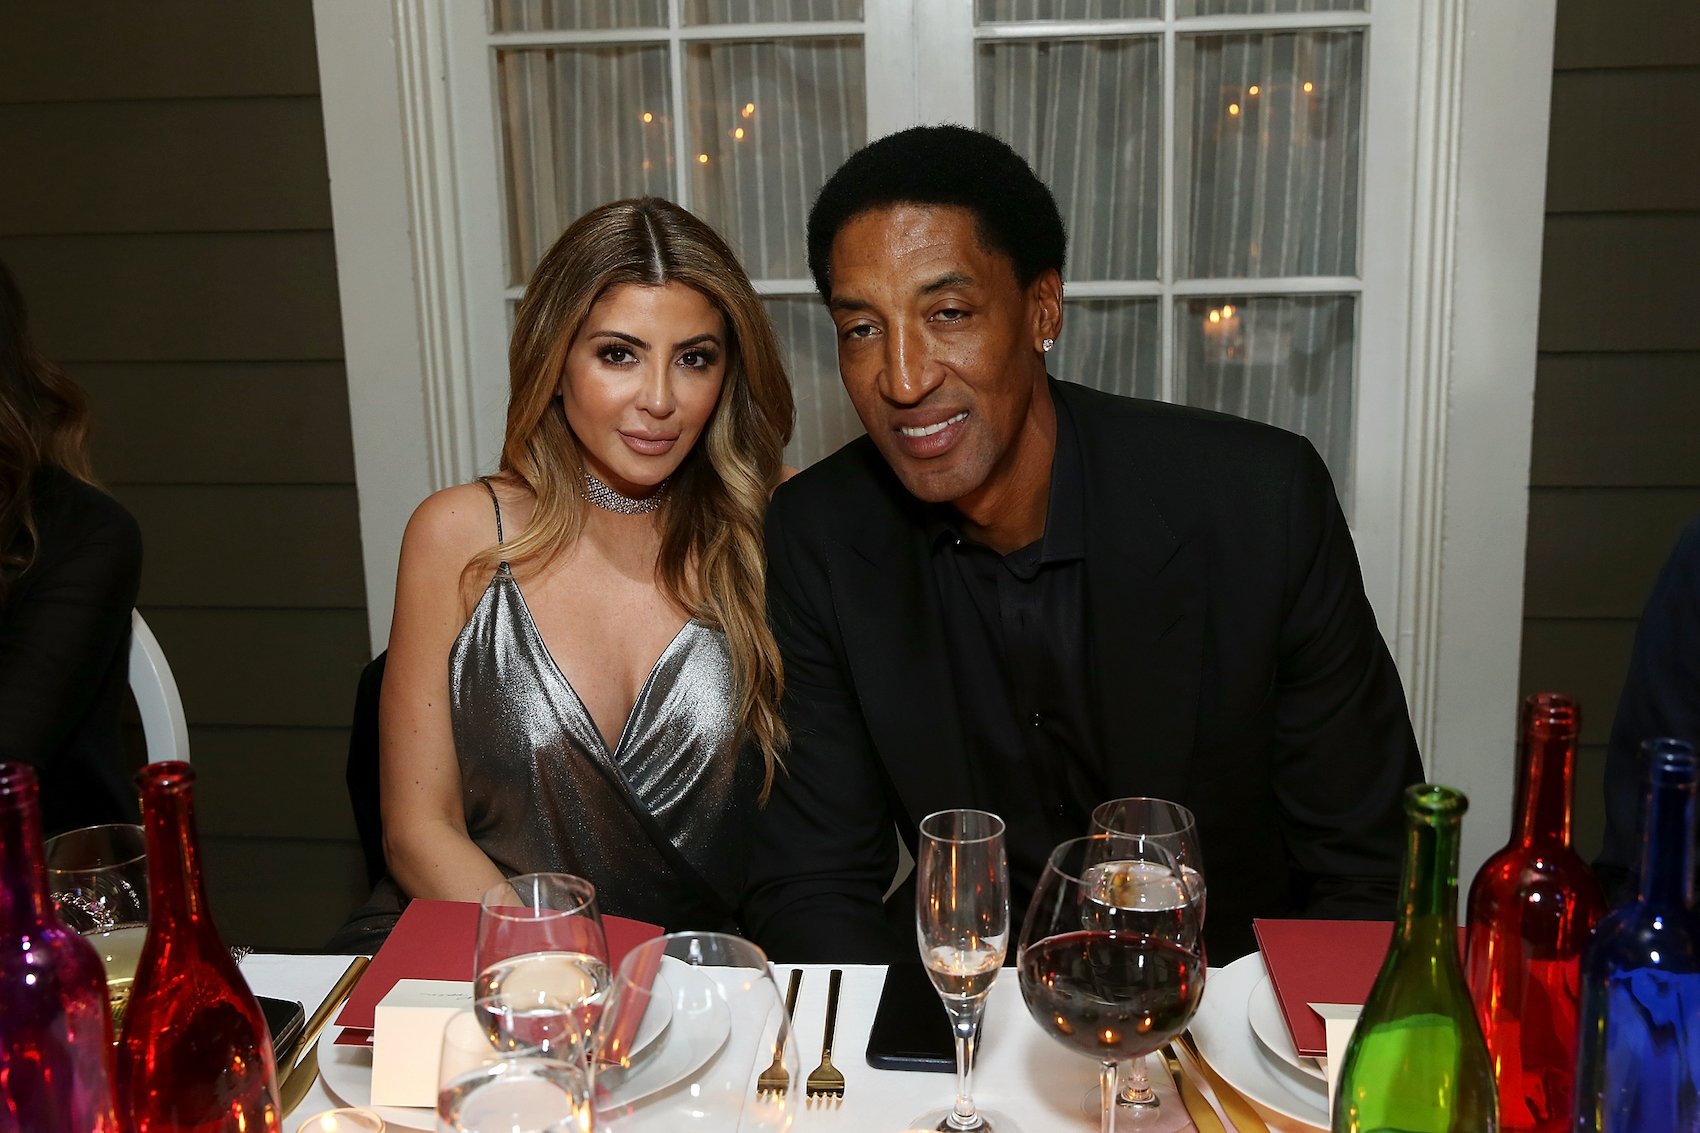 Larsa Pippen and Scottie Pippen, who have since divorced, posing for a photo together